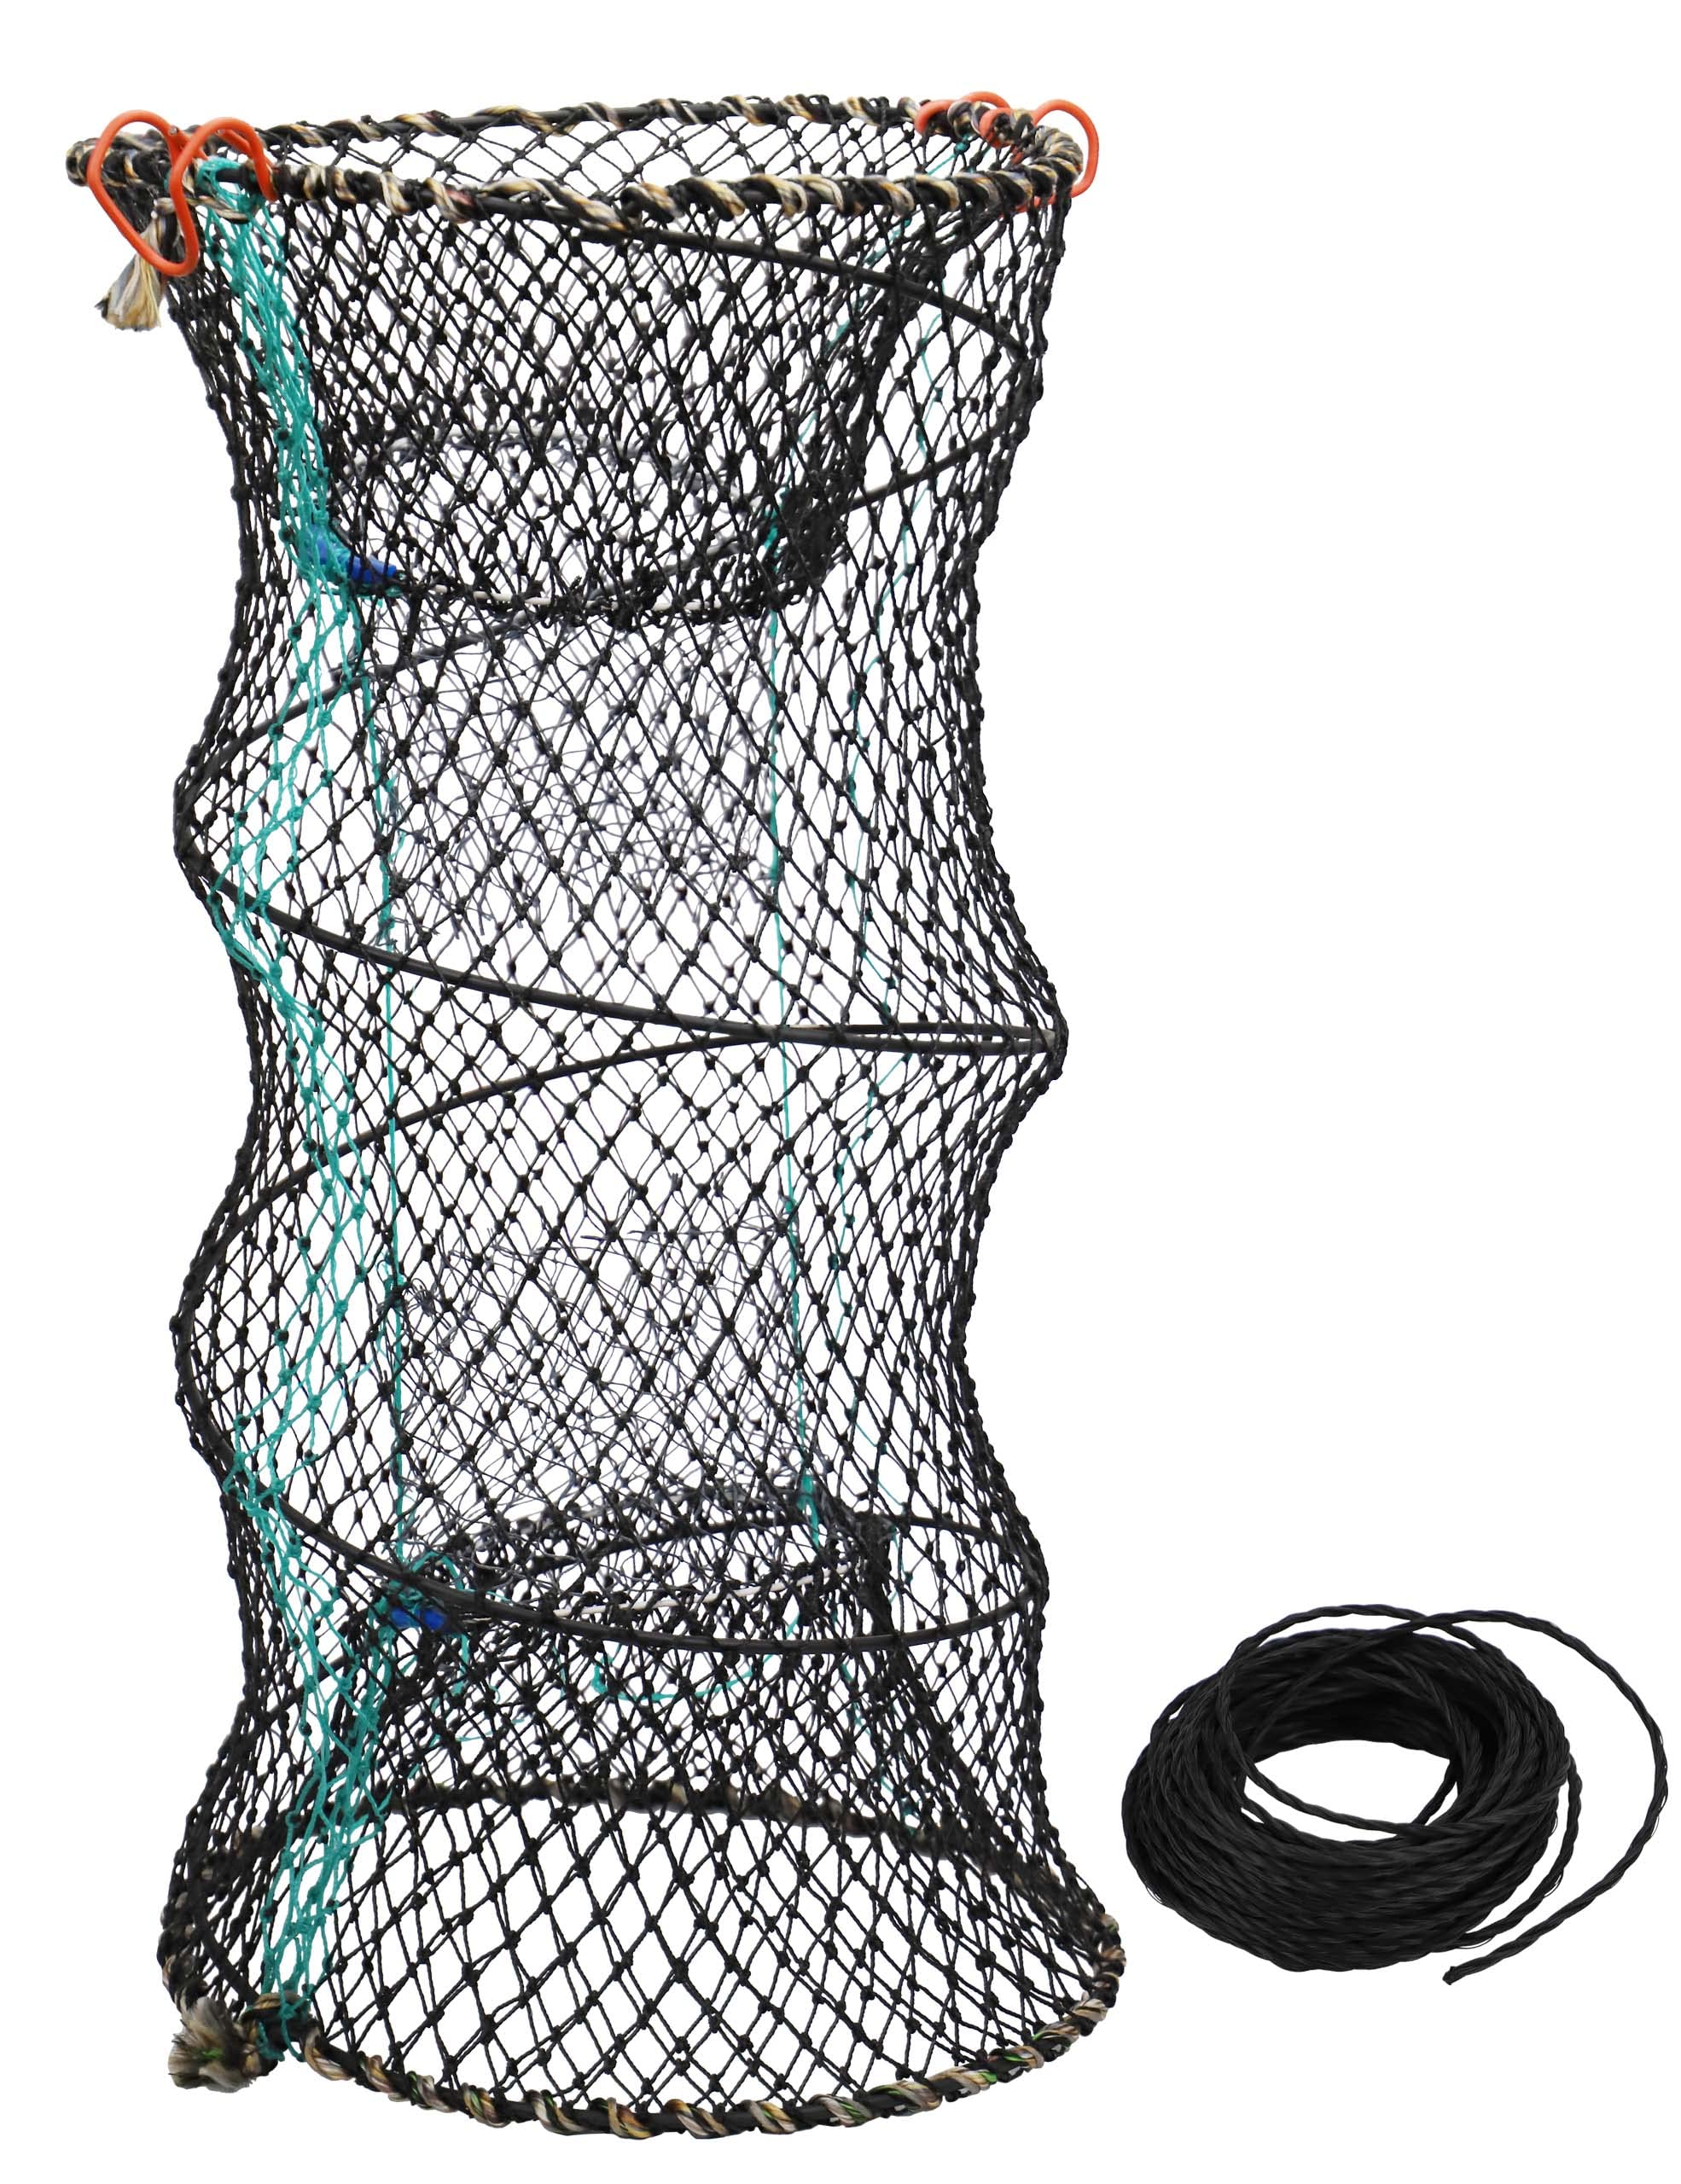 FGASAD Crab Trap Portable Folded Fishing Net Hand Casting Cage Crab Trap  Nylon Rope for Catching Small Bait Fish Eel Crab Lobster Minnows Shrimp :  : Sports & Outdoors